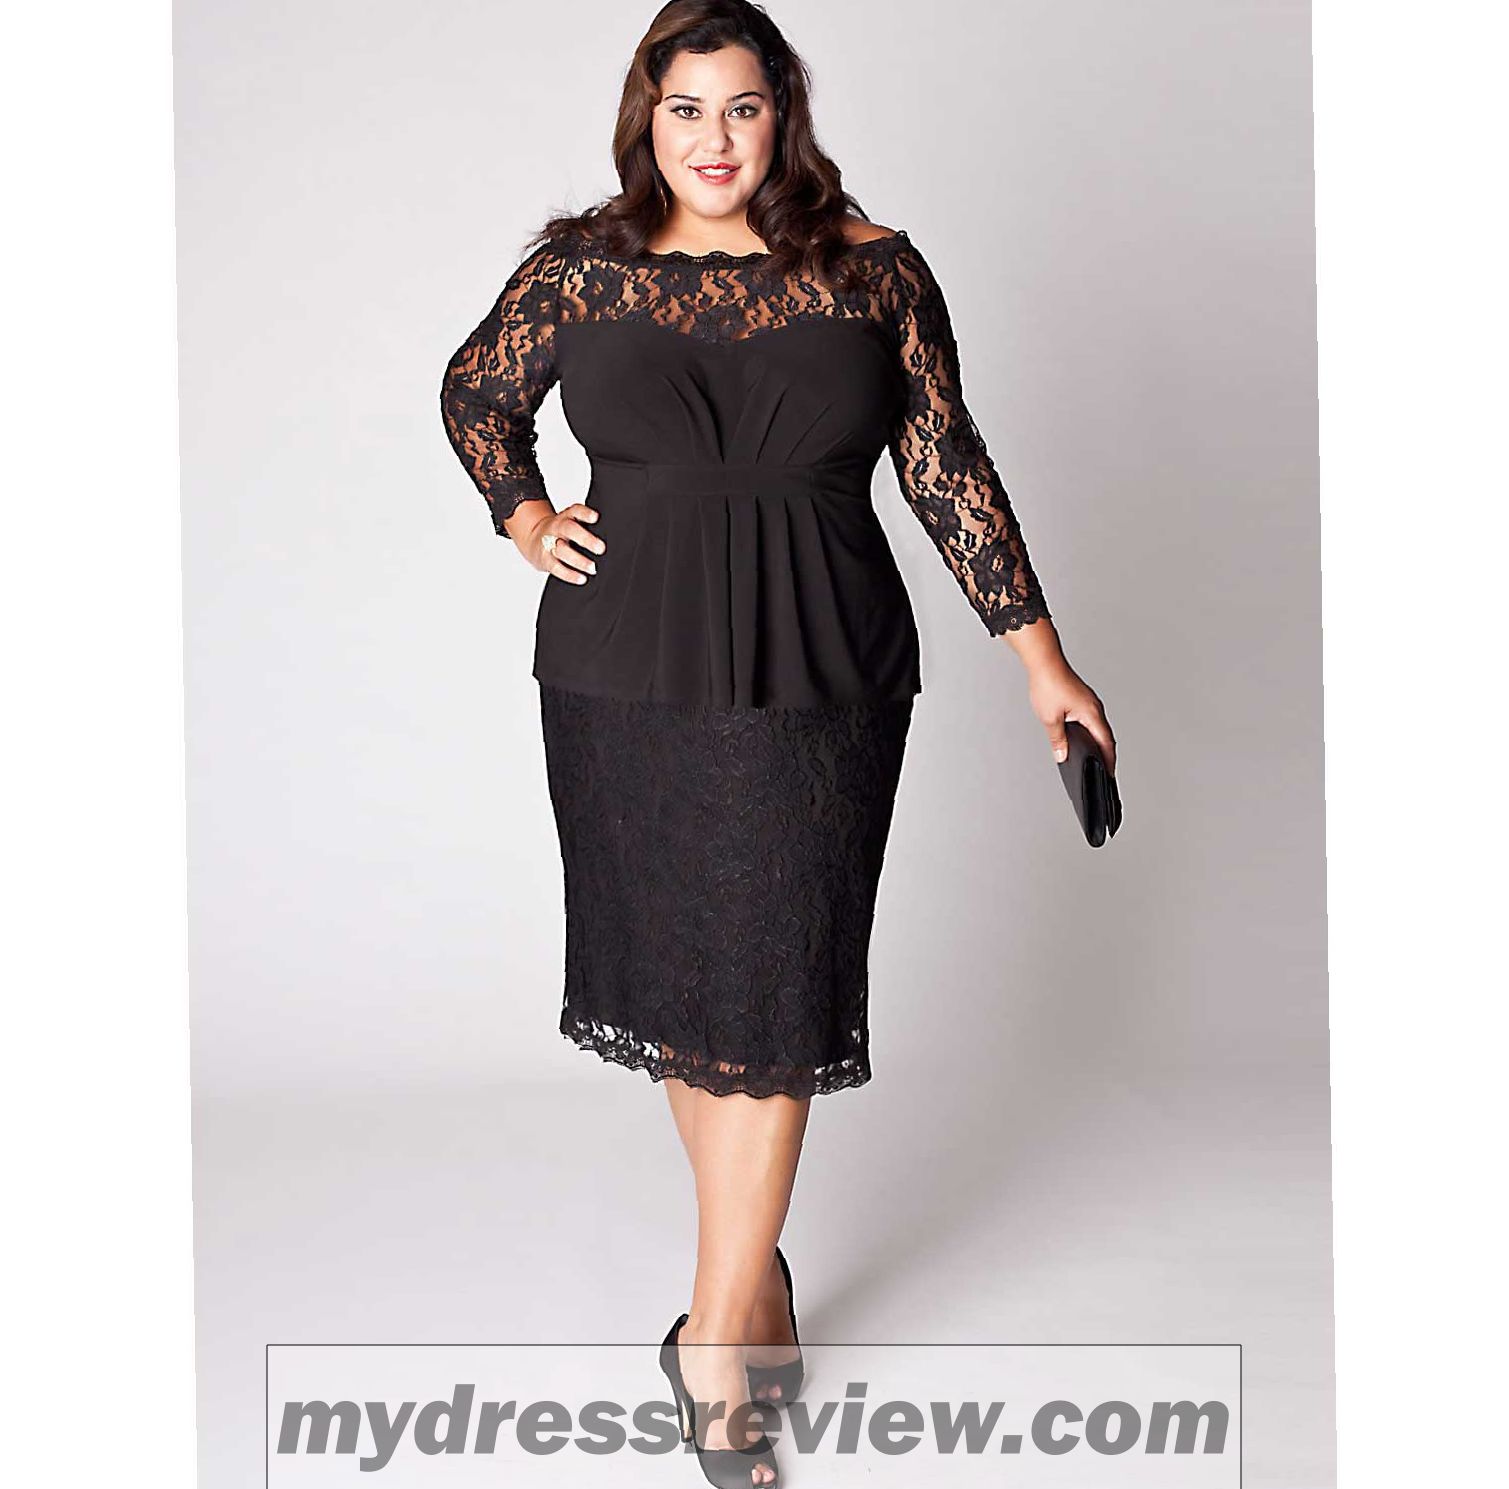 Body Dresses For Plus Size : Make You Look Like A Princess